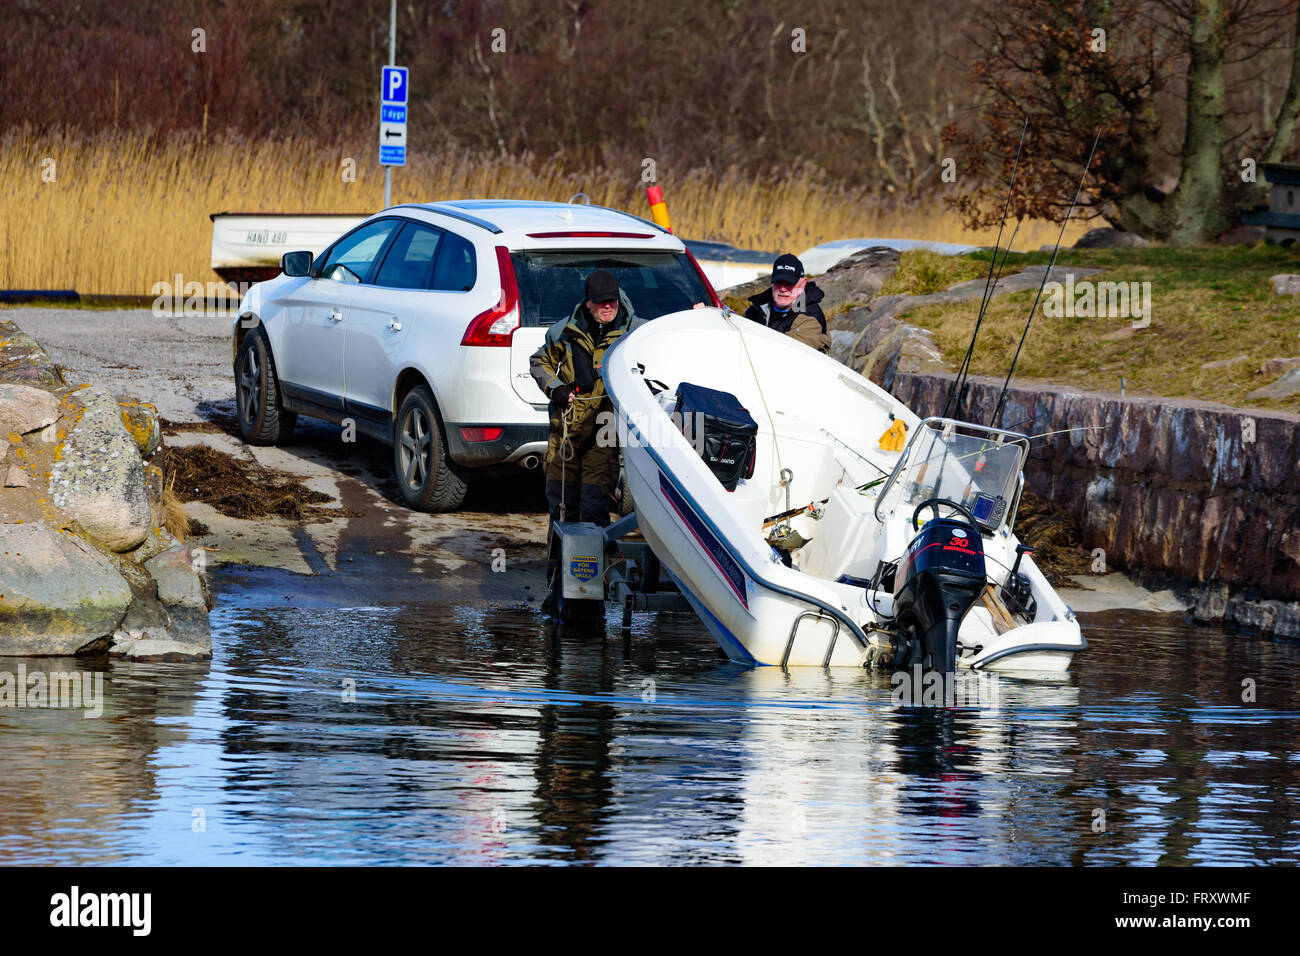 Torhamn, Sweden - March 18, 2016: The launching of a small plastic motor boat at a ramp in the marina. Two men push on the boat Stock Photo